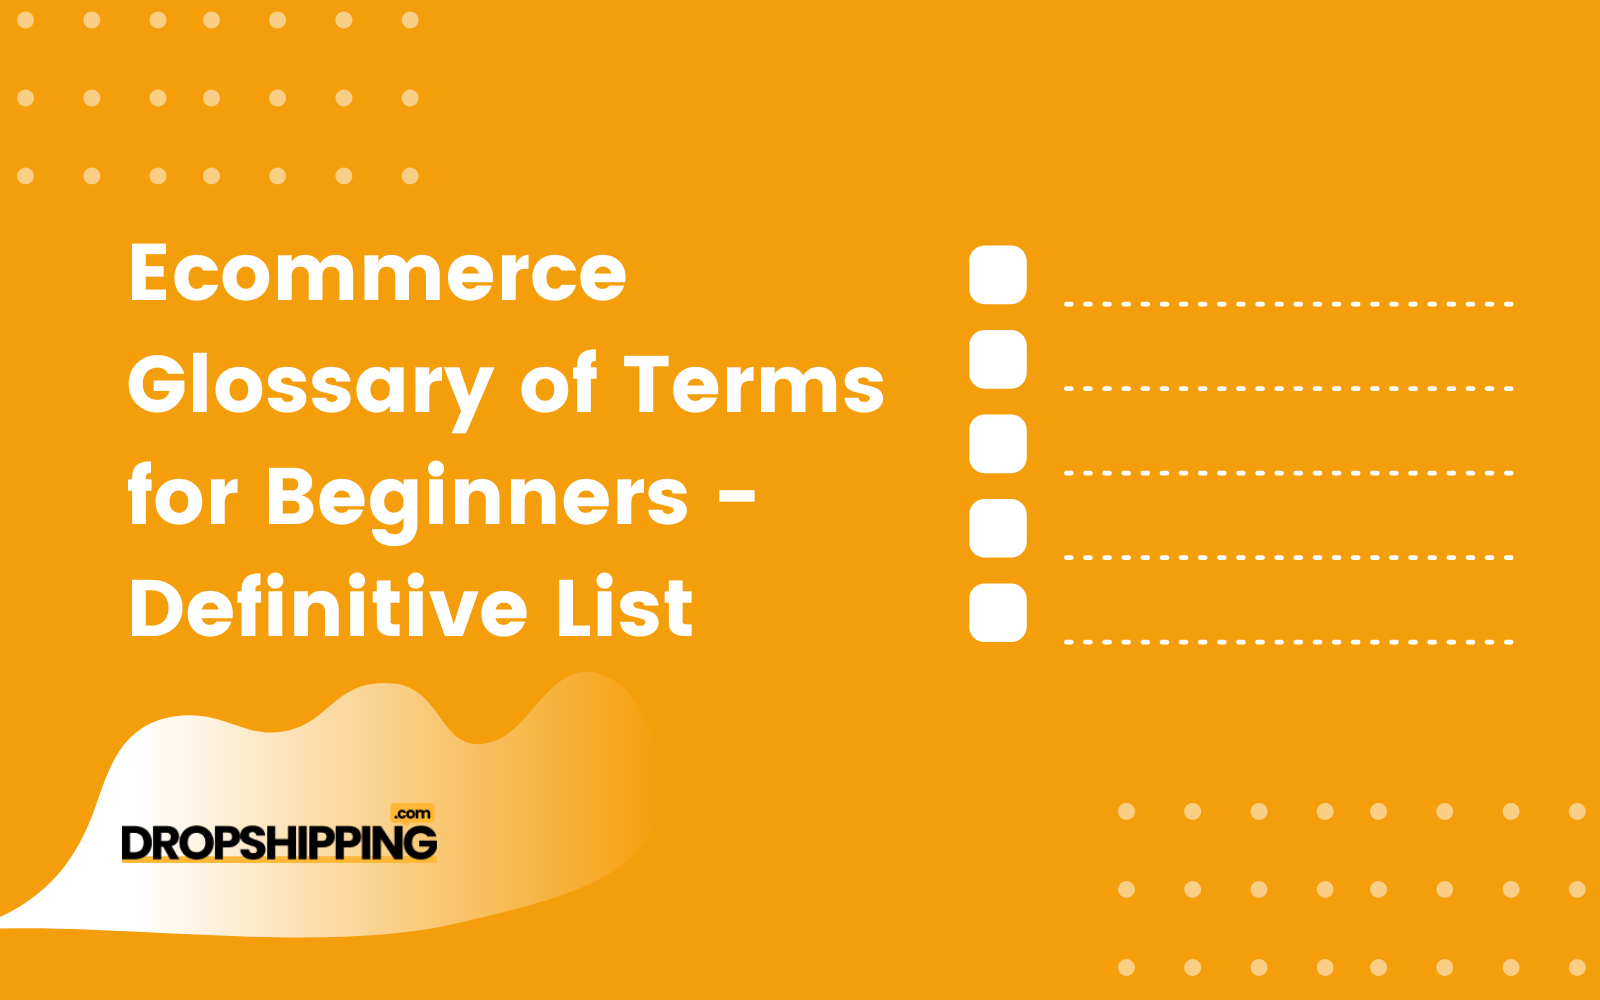 Dropshipping & Ecommerce Glossary of Terms for Beginners: Definitive List